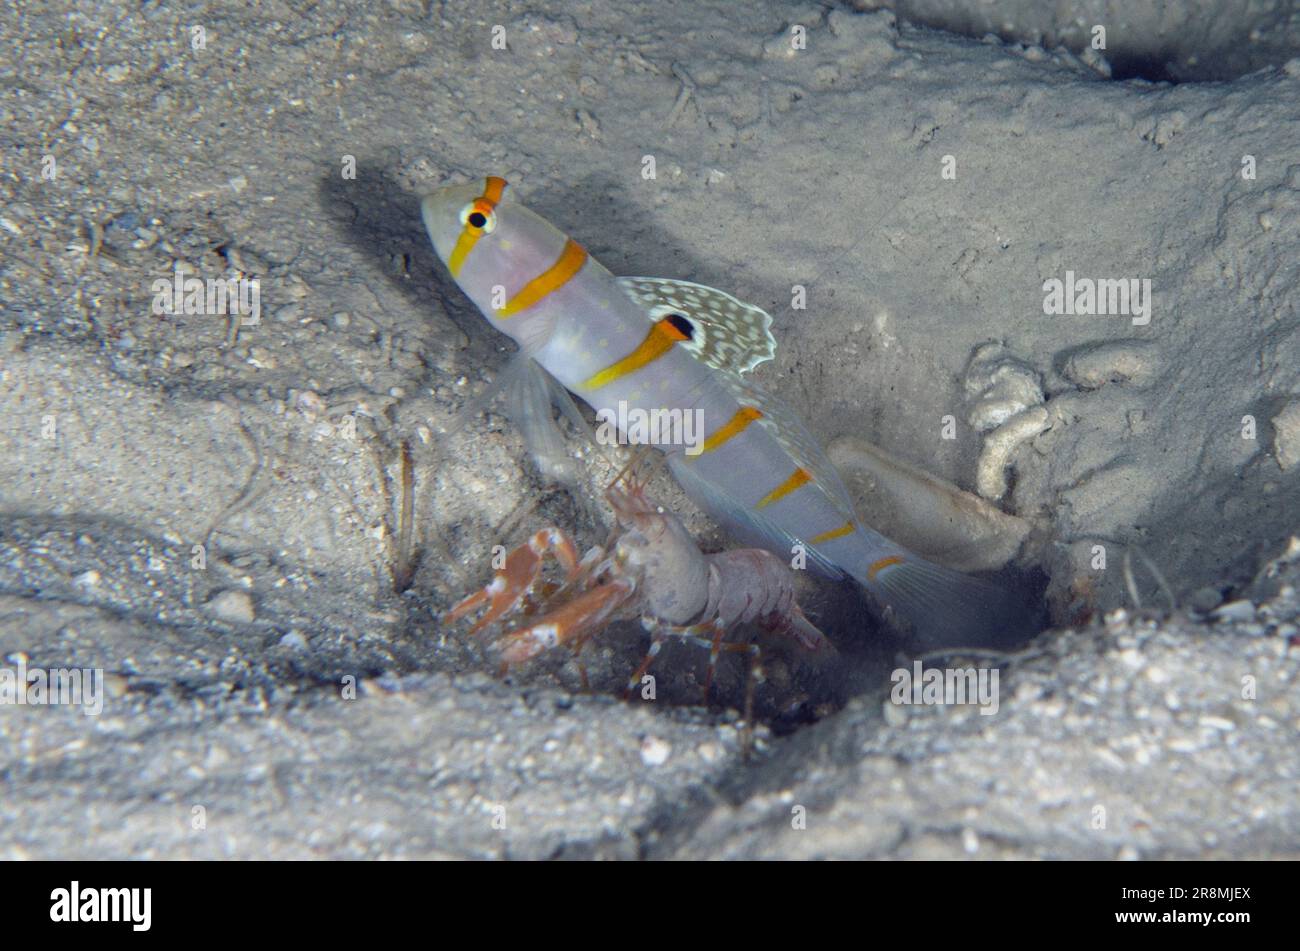 Randall's Shrimpgoby, Amblyeleotris randalli, with extended fin by Alpheid Shrimp, Alpheus sp, by hole in sand, Post dive site, Menjangan Island, Bali Stock Photo